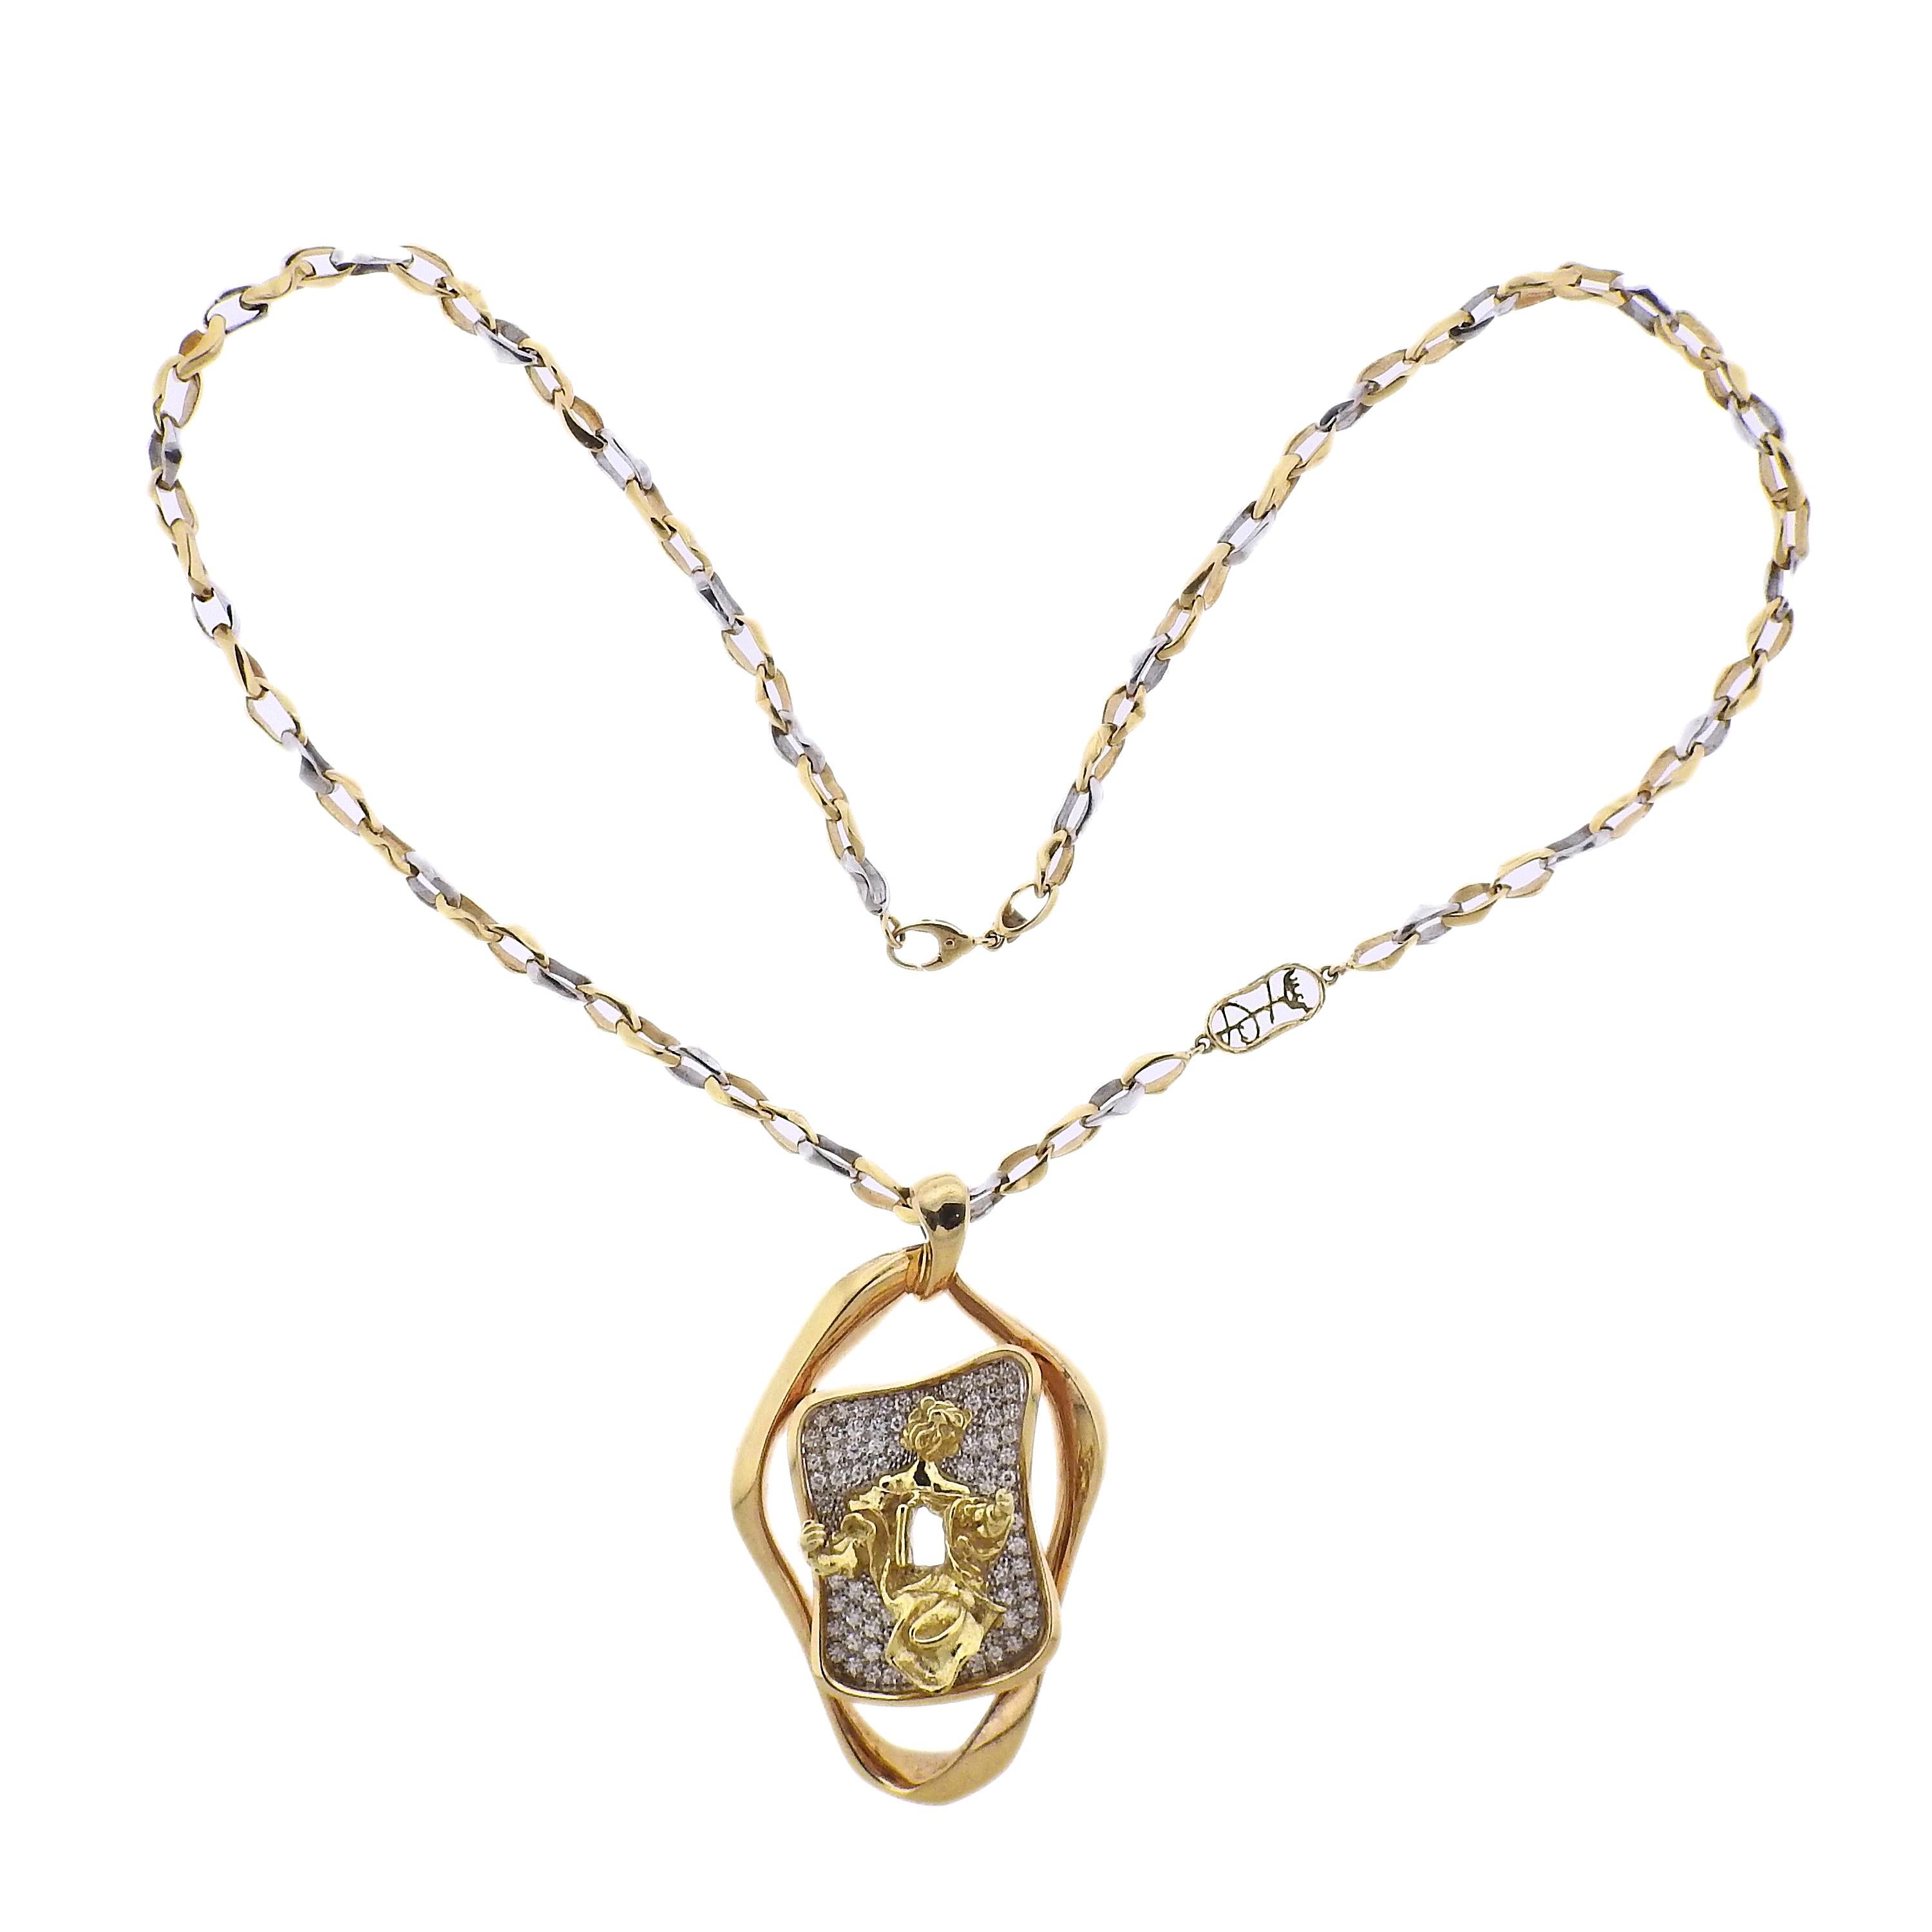 Rare limited edition 18k gold pendant necklace by Salvador Dali, Number 5 of 6 made. With approx. 1.80ctw H/VS diamonds. Necklace is 21.5